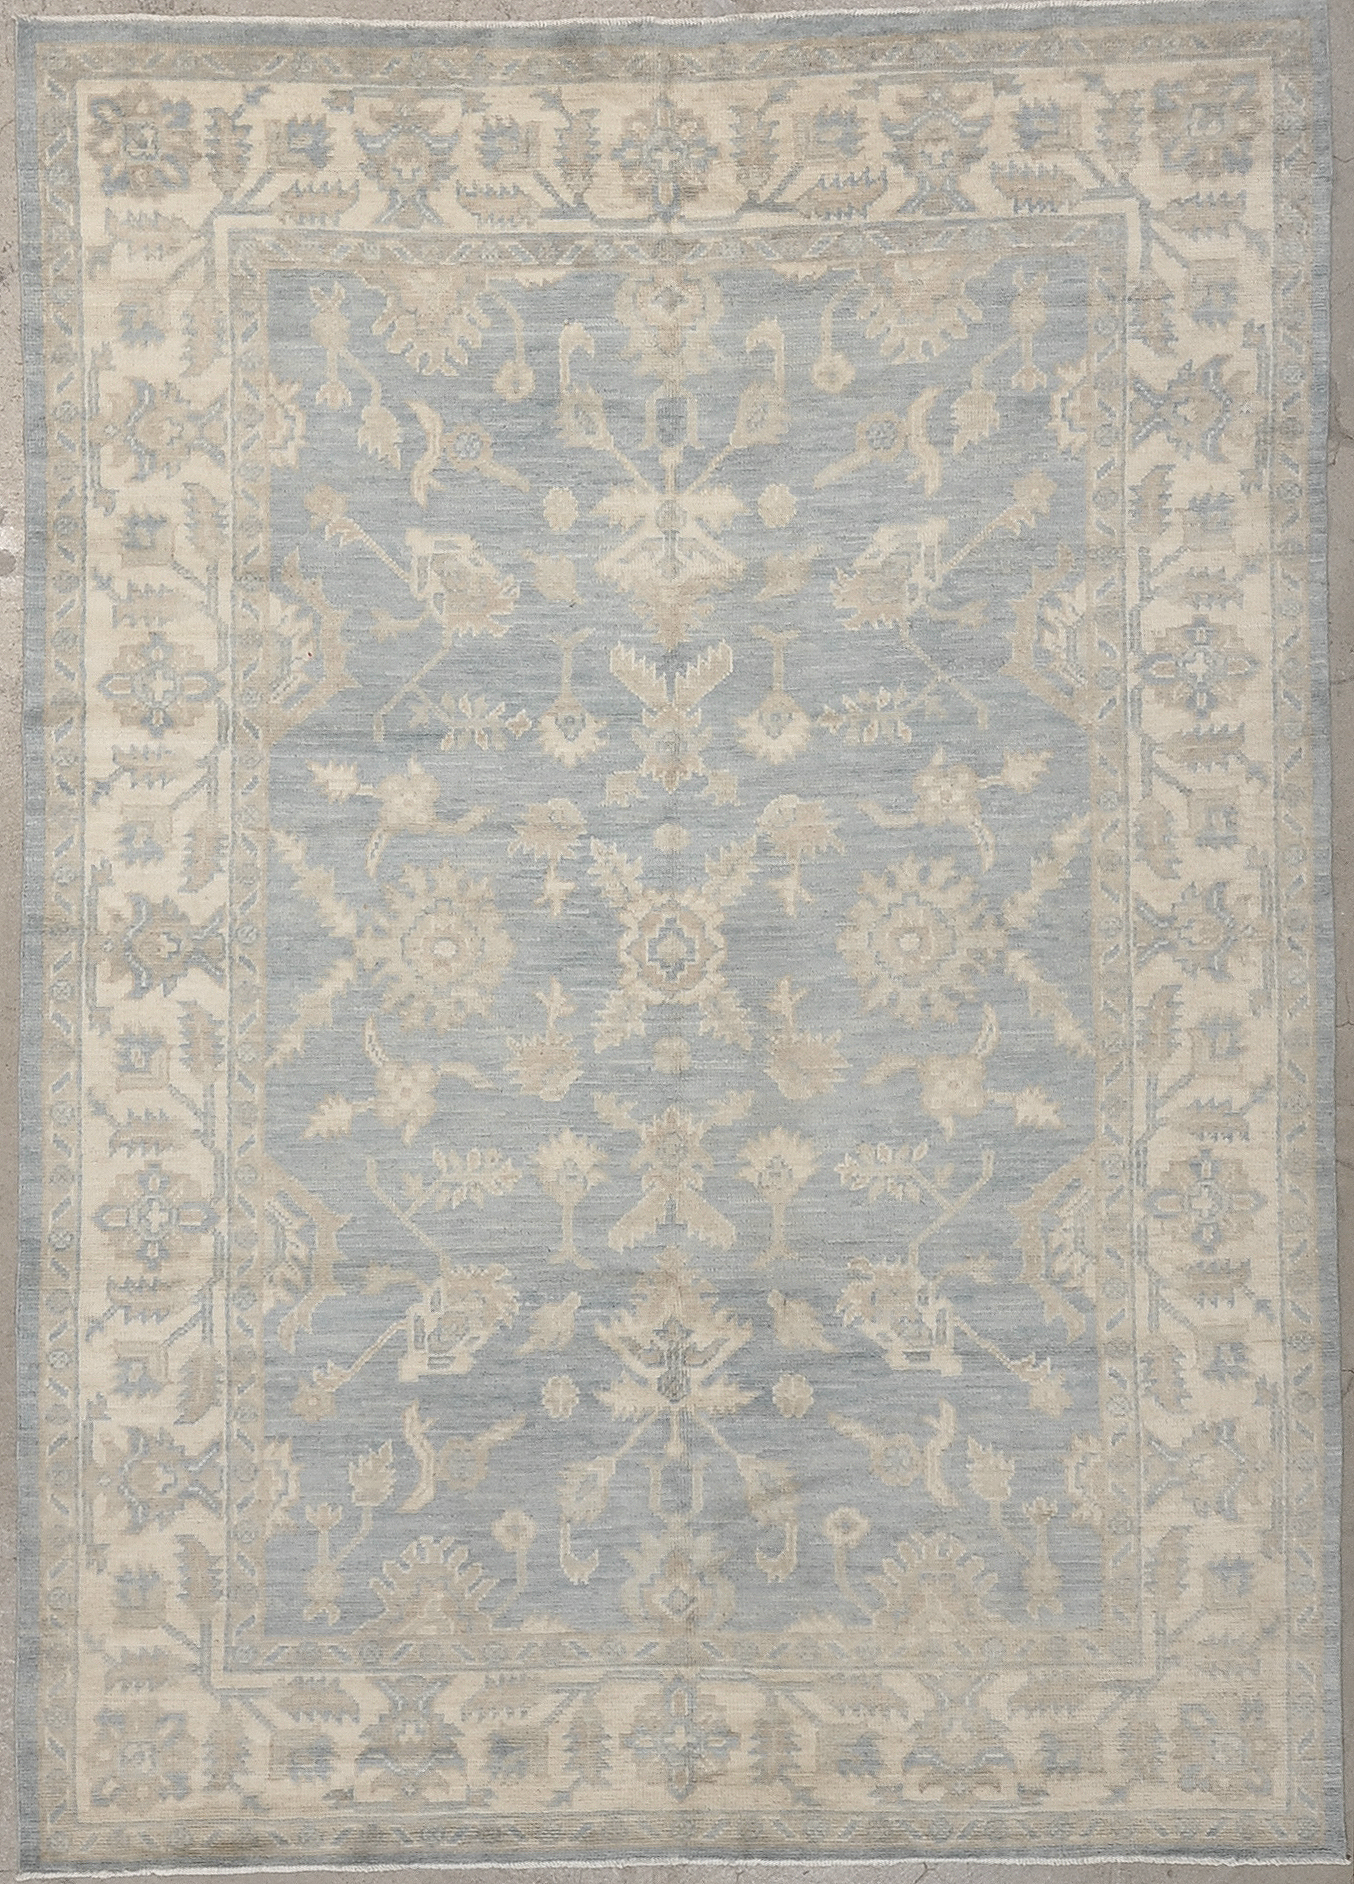 Antiqued Angora Oushak rugs and more -